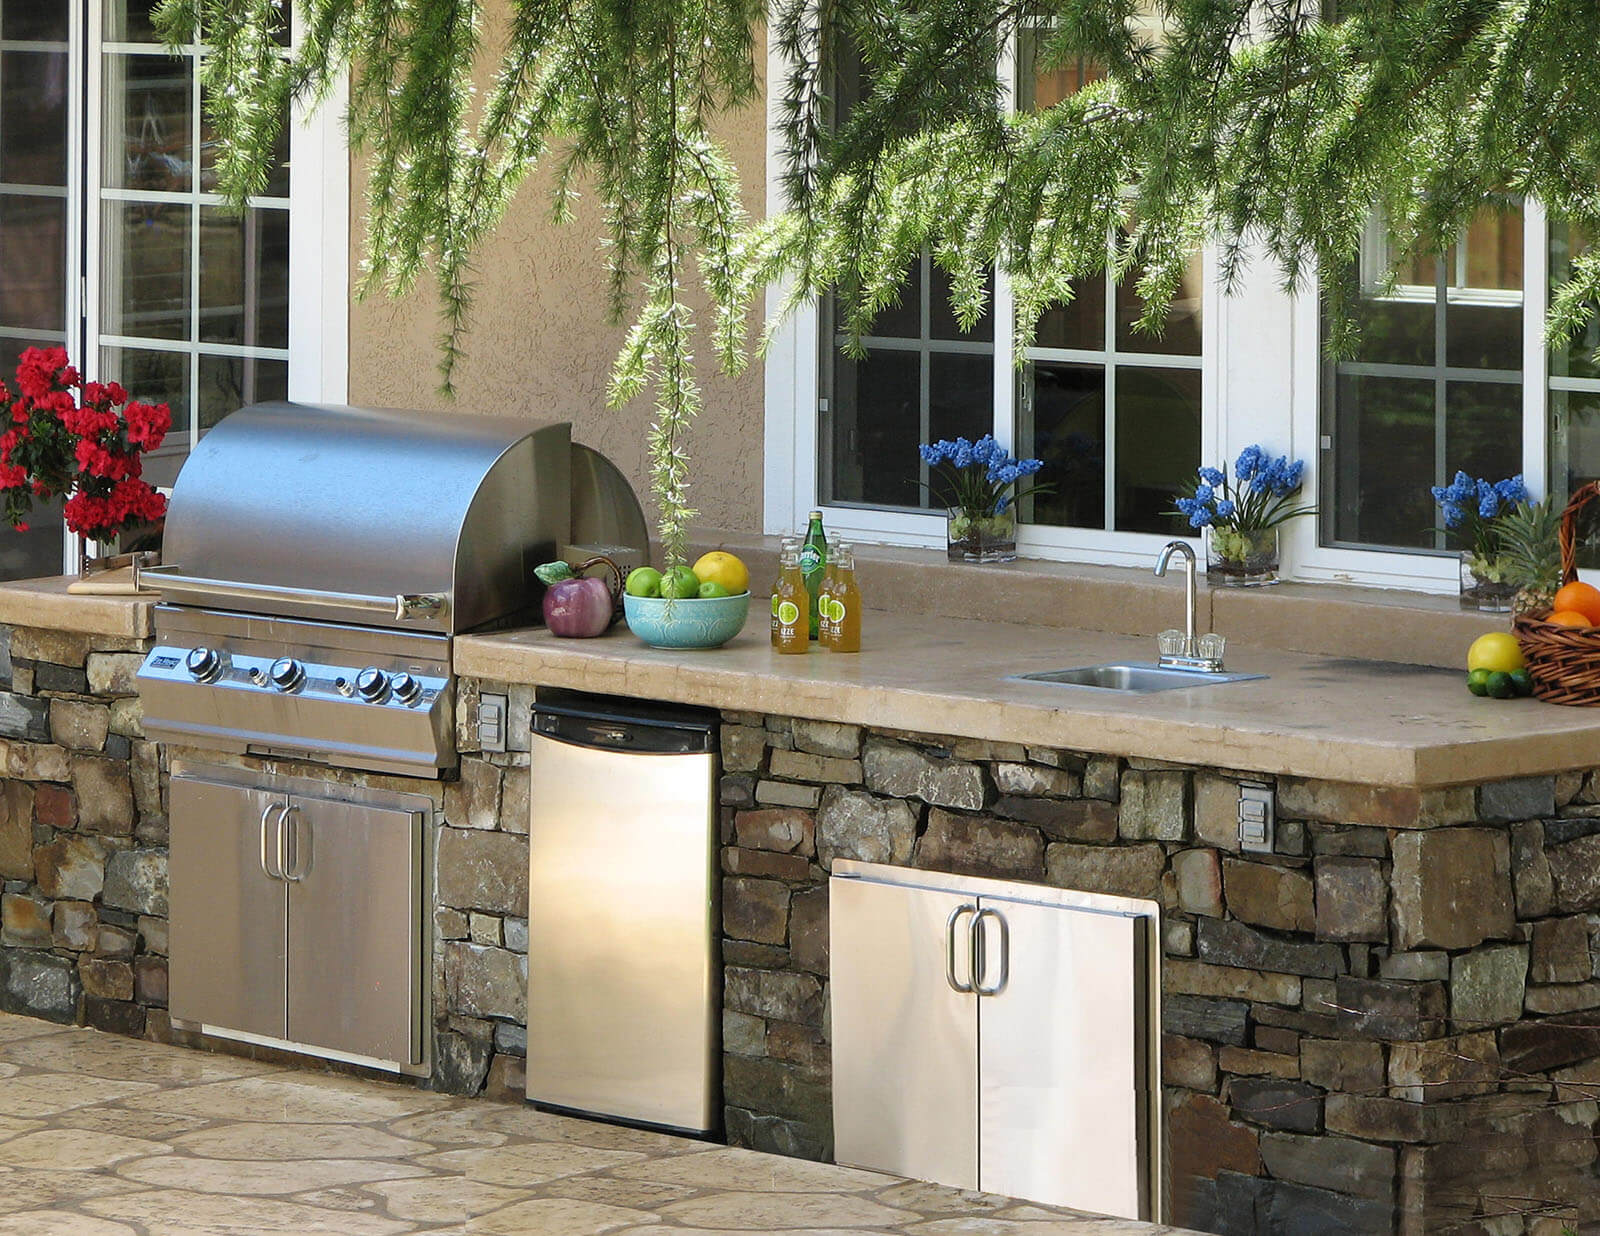 Outdoor shaded grill area with tan stone counter tops, stow space, sink, and stone tile siding.